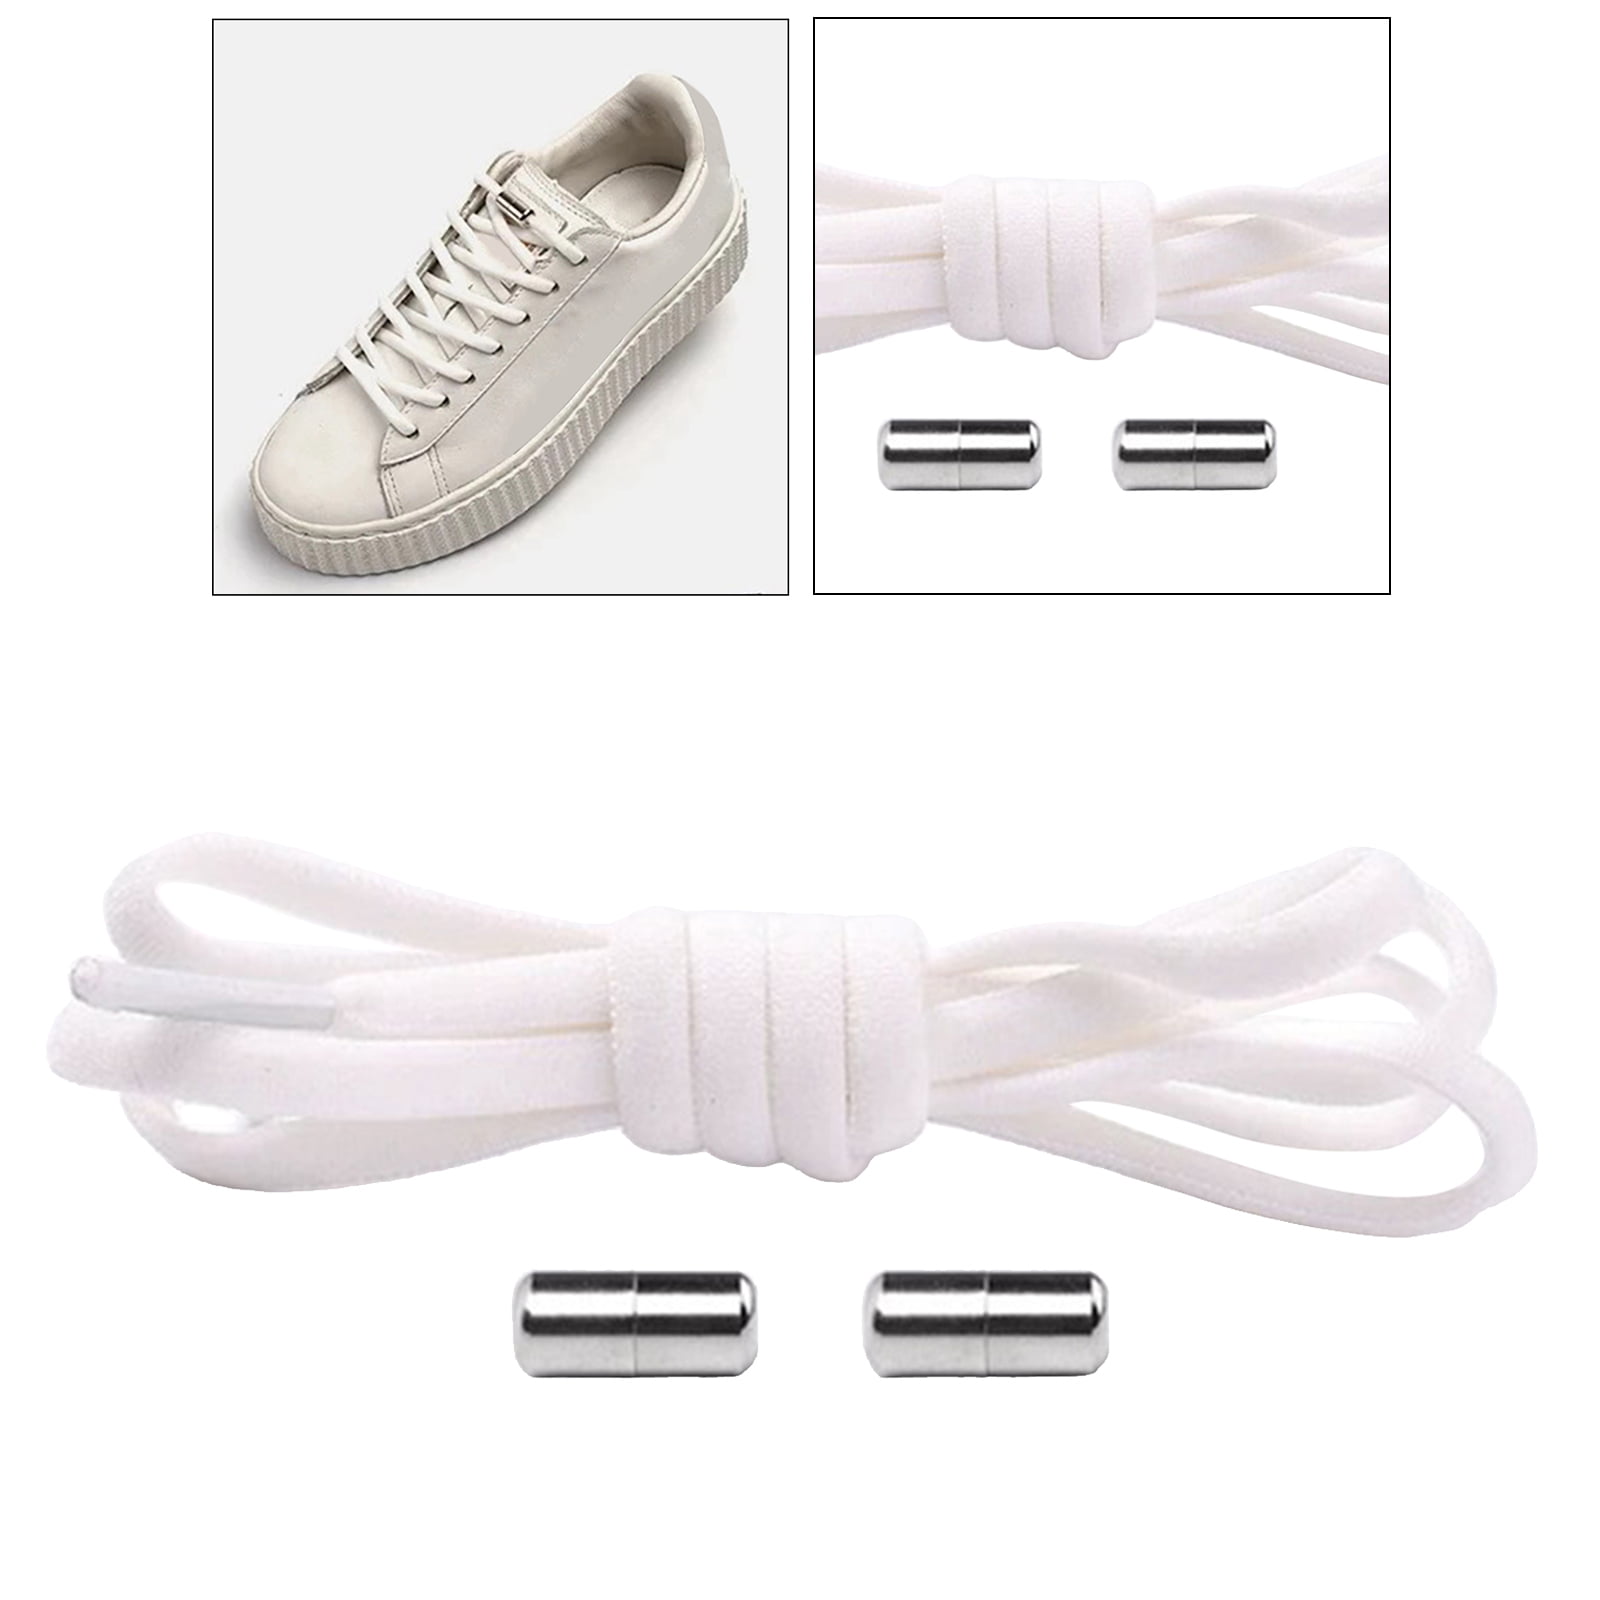 No Tie Elastic Shoelace Lock Laces Shoe Strings Fastening Sports Locking Toggle 